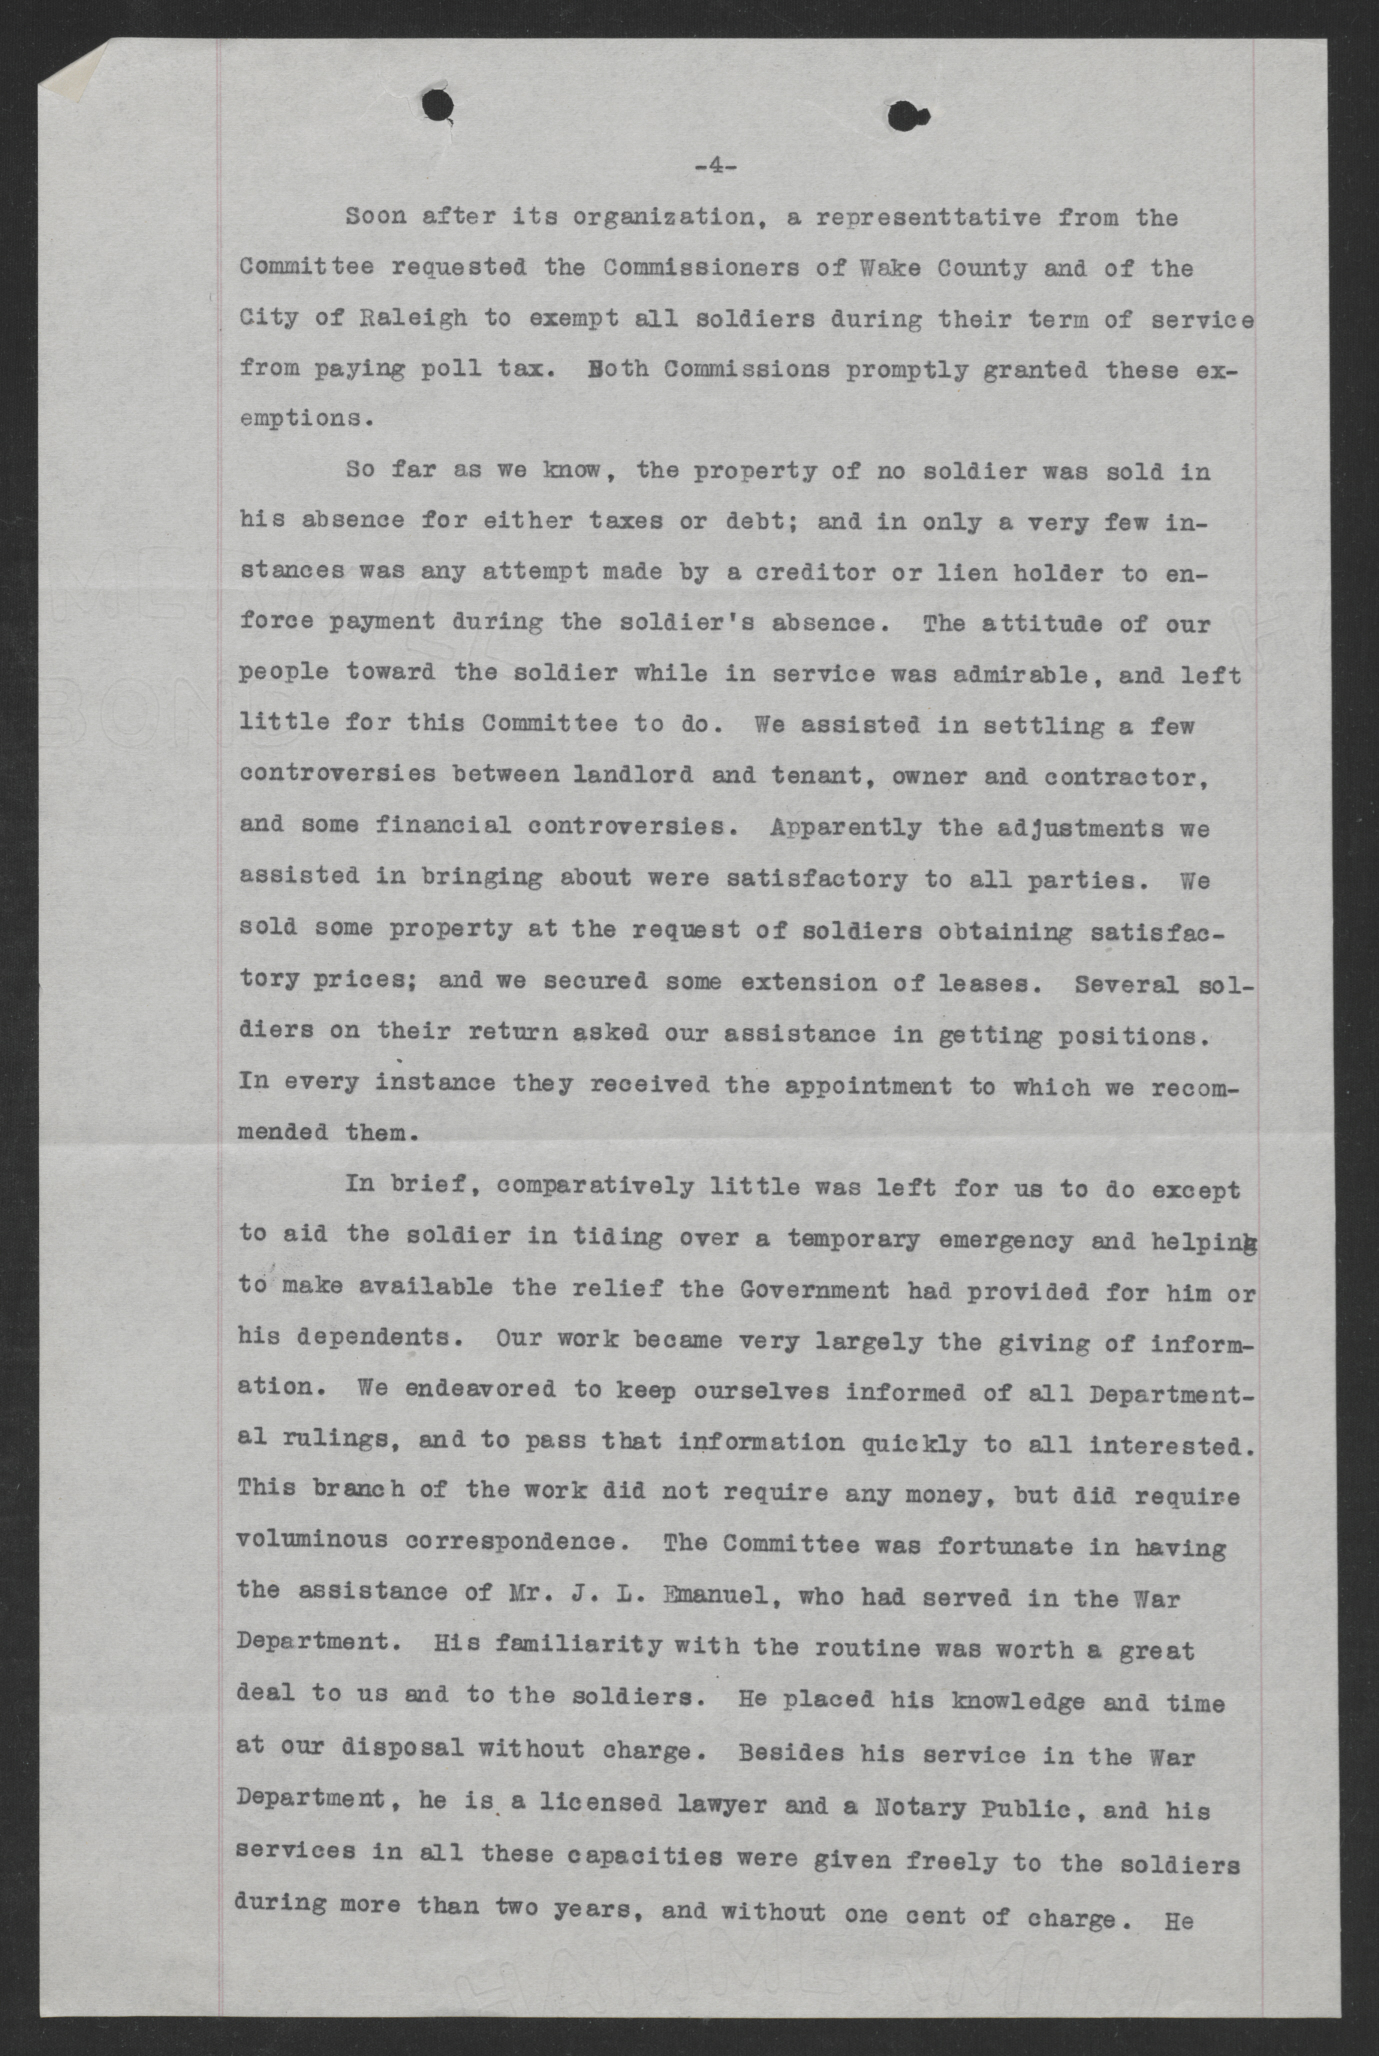 Letter from the Soldiers' Business Aid Committee of Wake County to Thomas W. Bickett, May 20, 1920, page 4